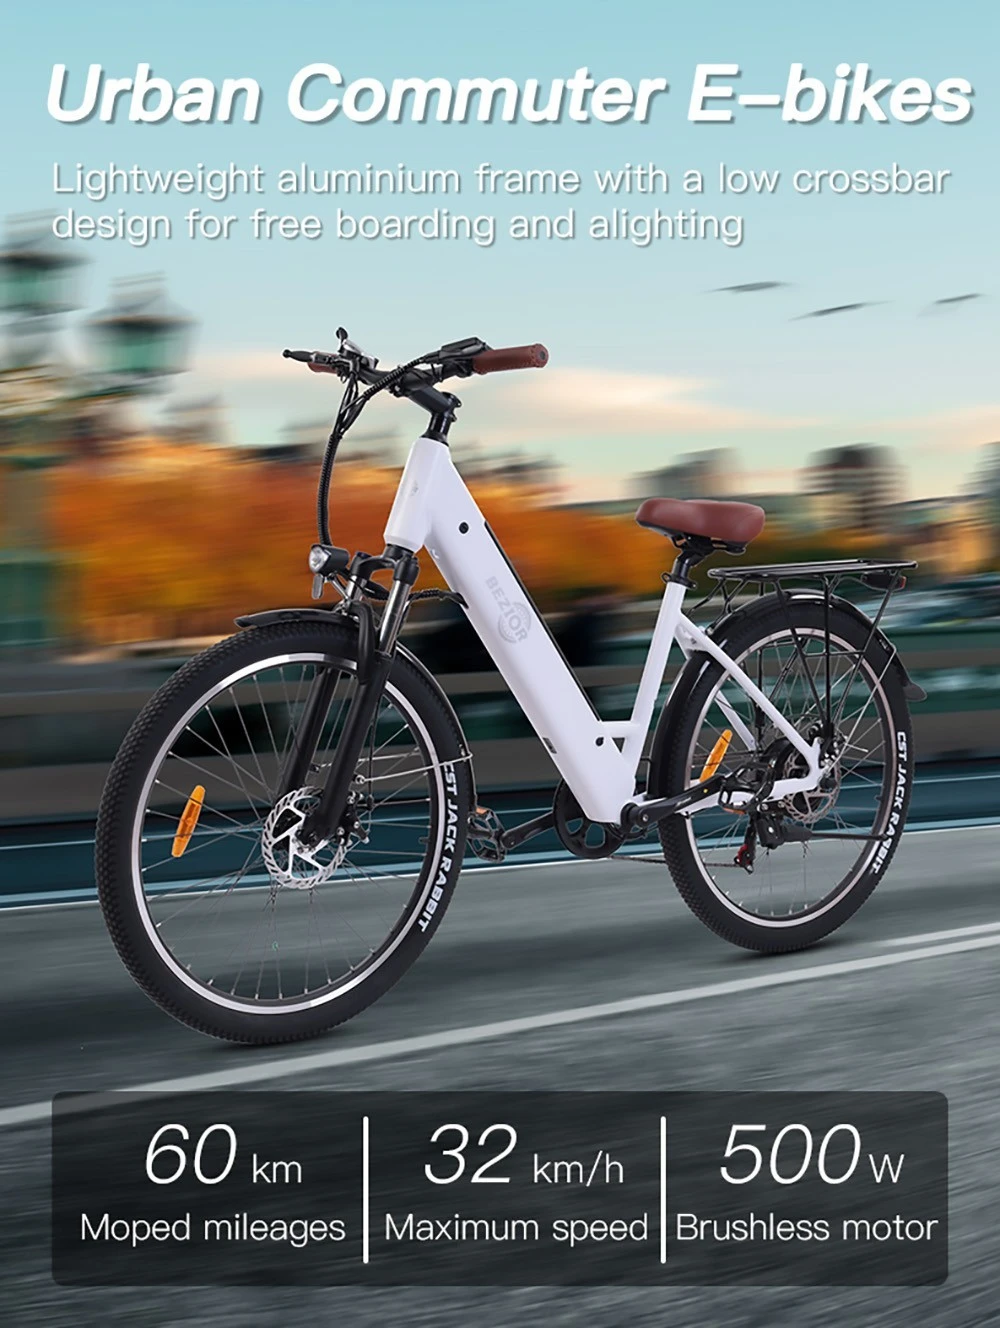 Bezior M3 Electric Bike 48V 500W Motor 32km/h Max Speed 10.4Ah Battery 60km Max Range 26*2.1'' CST Tires Shimano 7 Speed Gear - White